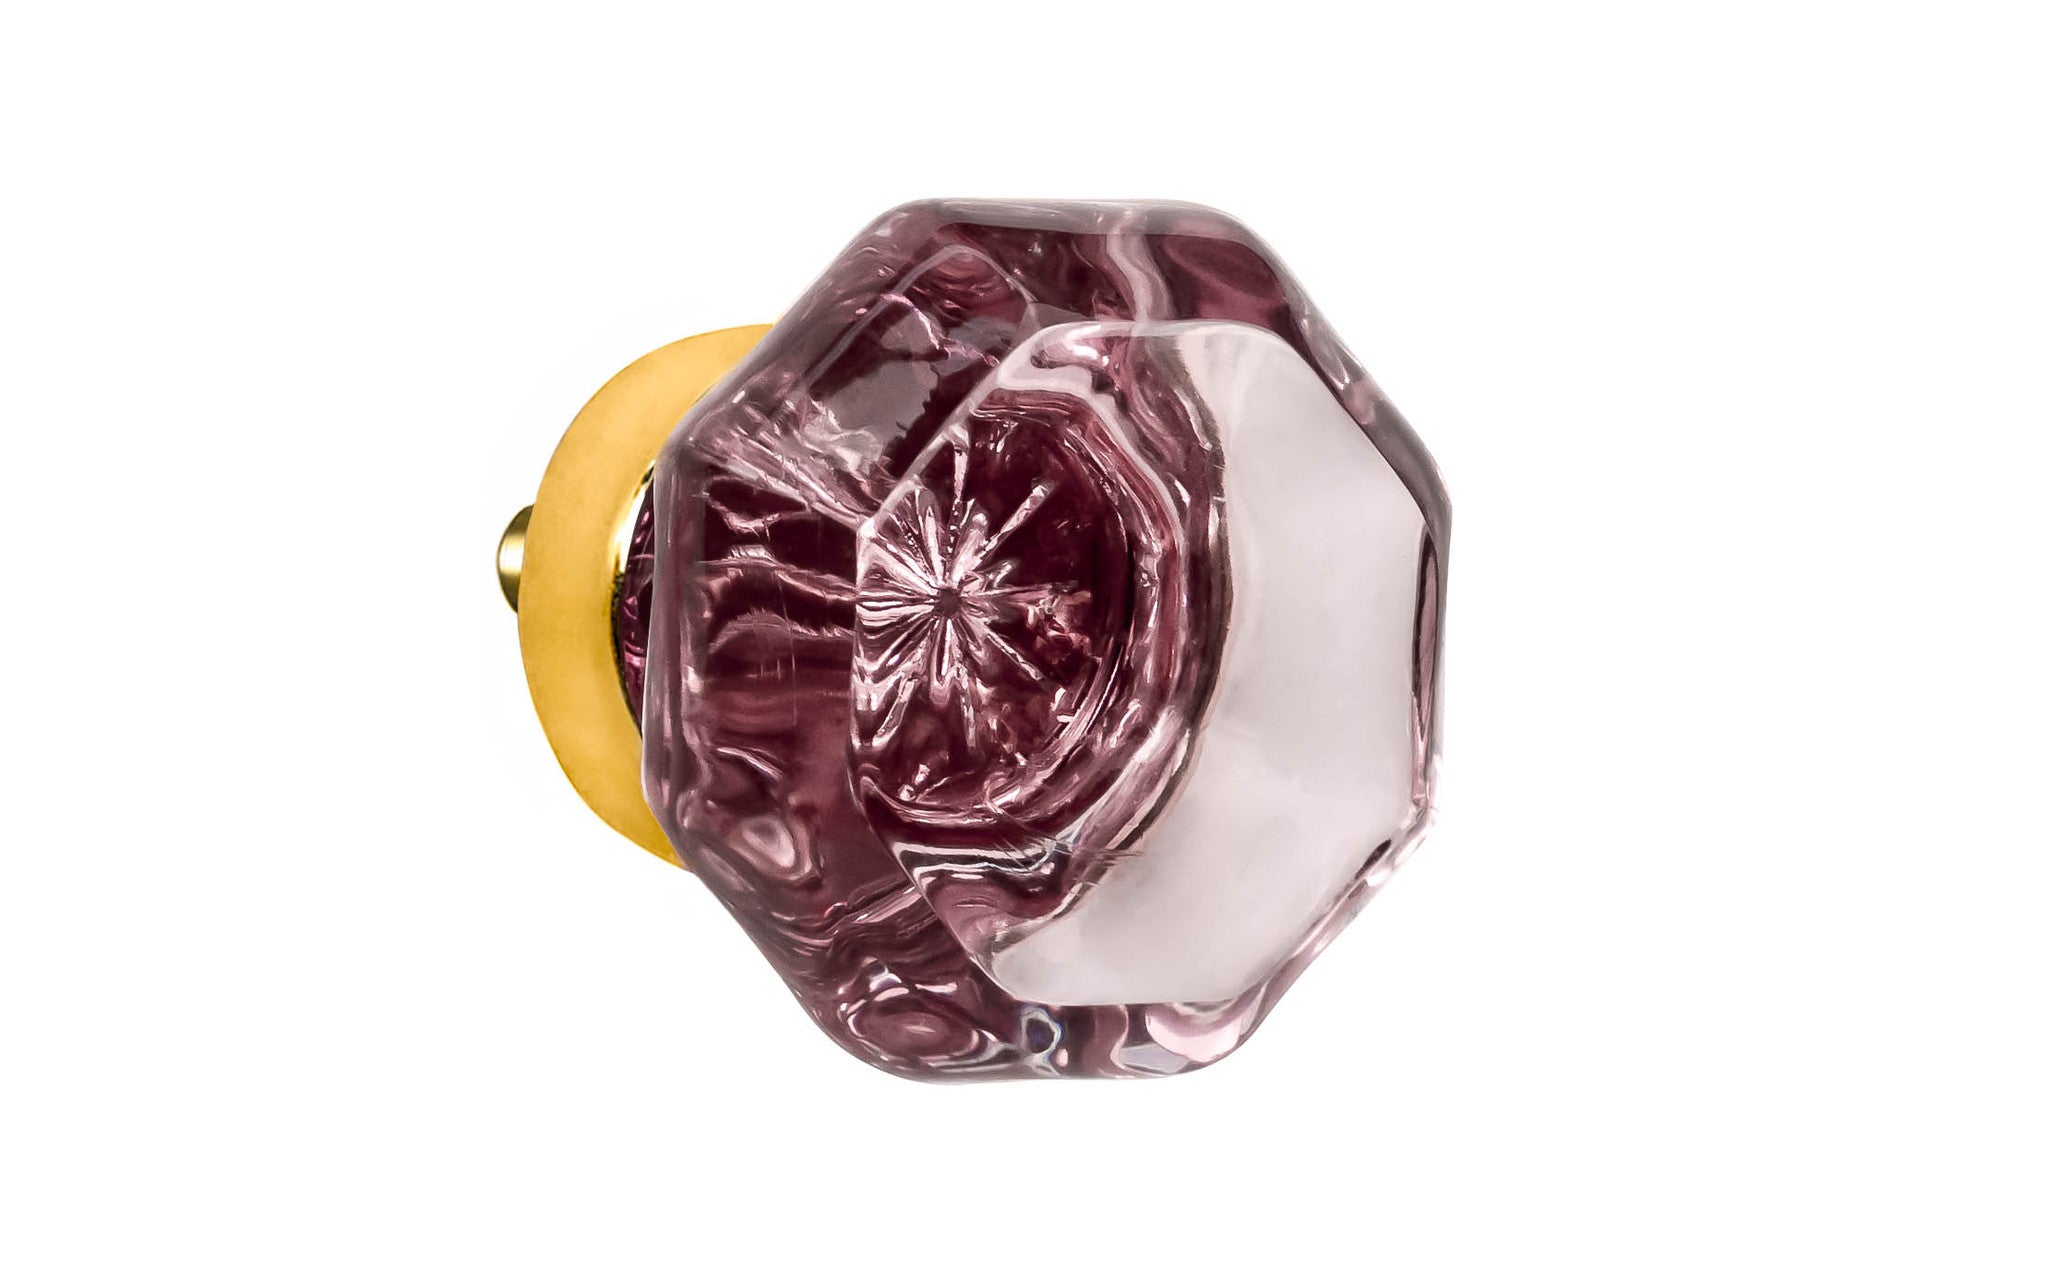 Elegant & classic octagonal cabinet glass knob with an attractive 